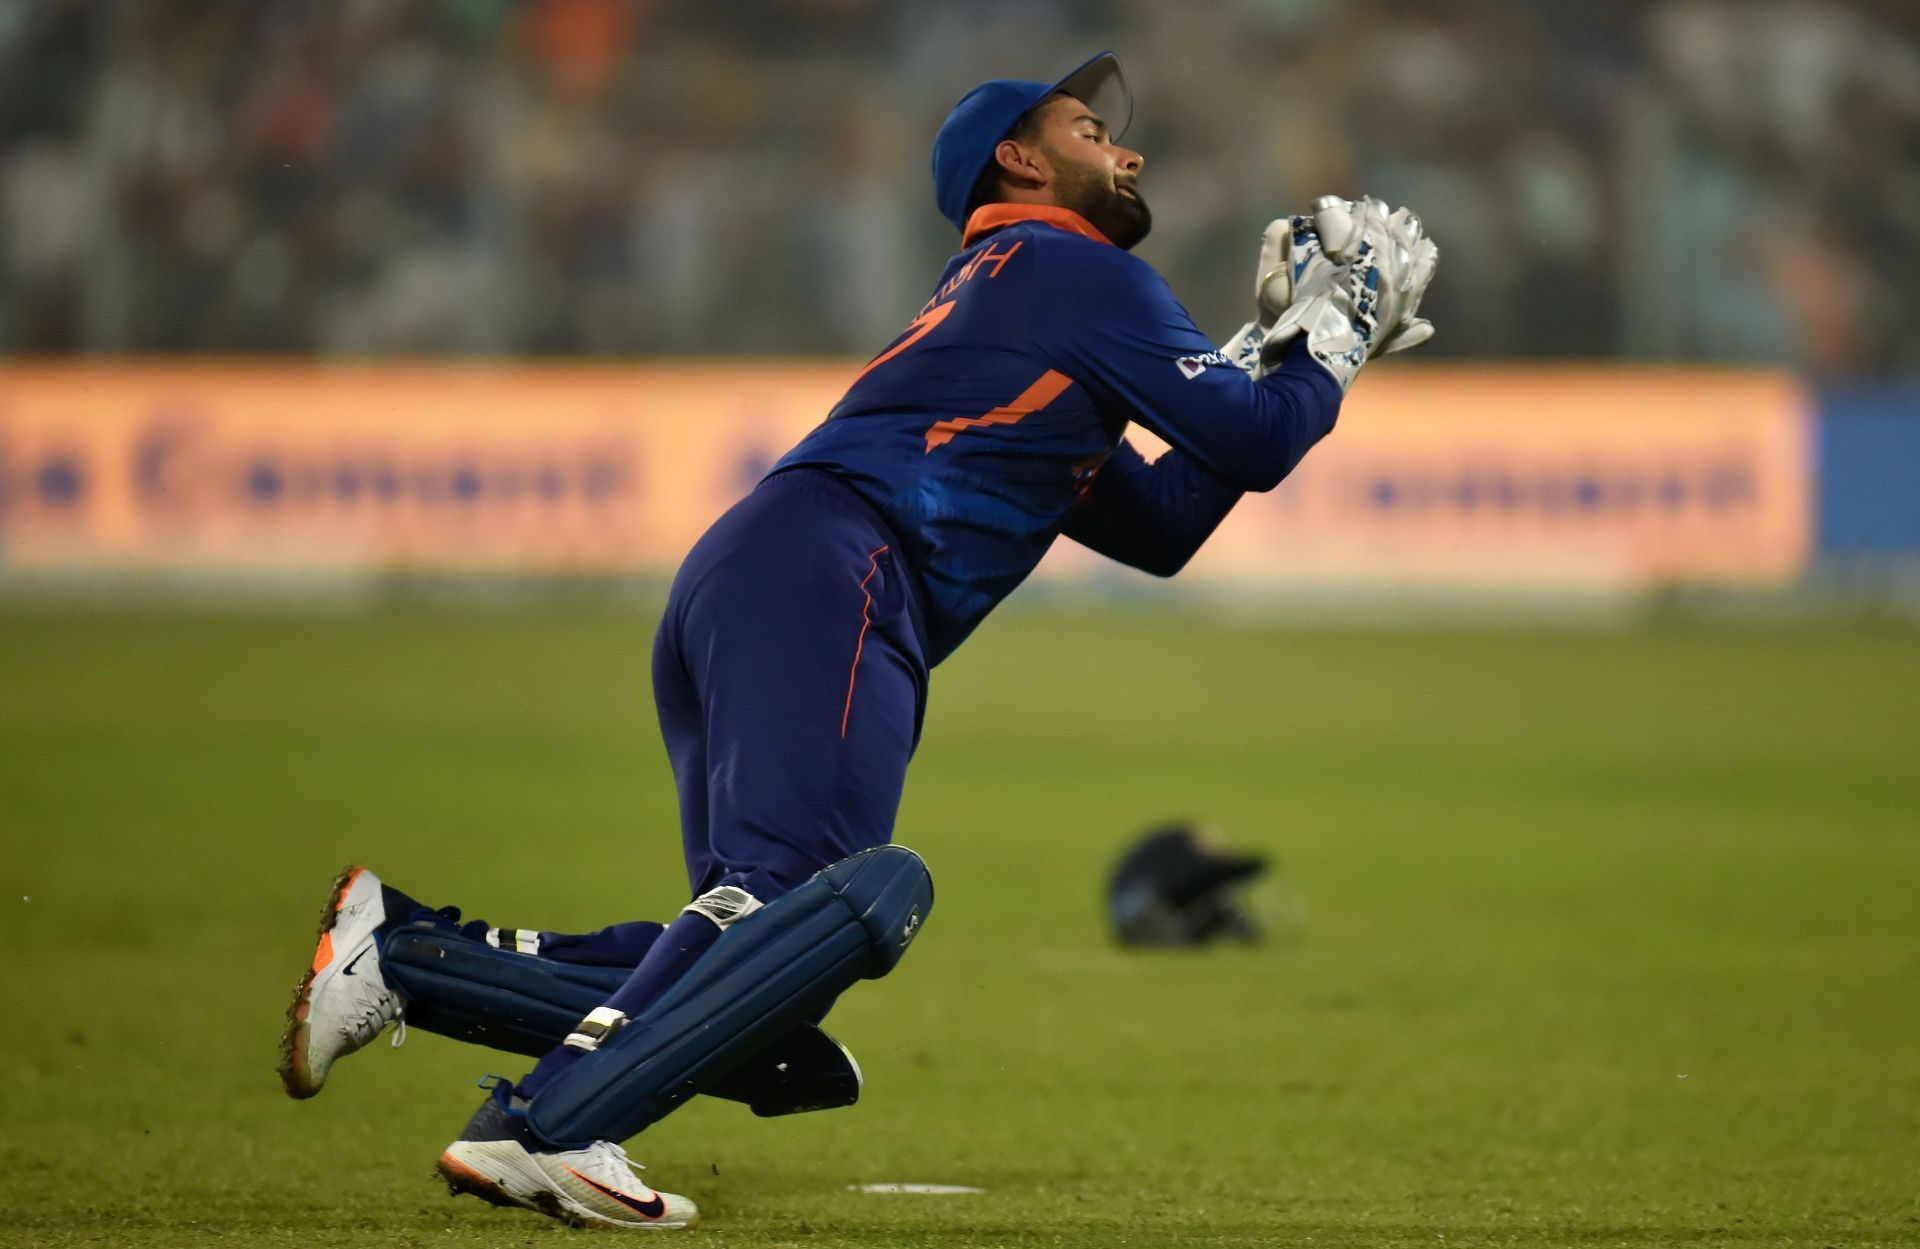 Rishabh Pant will need to balance captaincy and batting - this time for India